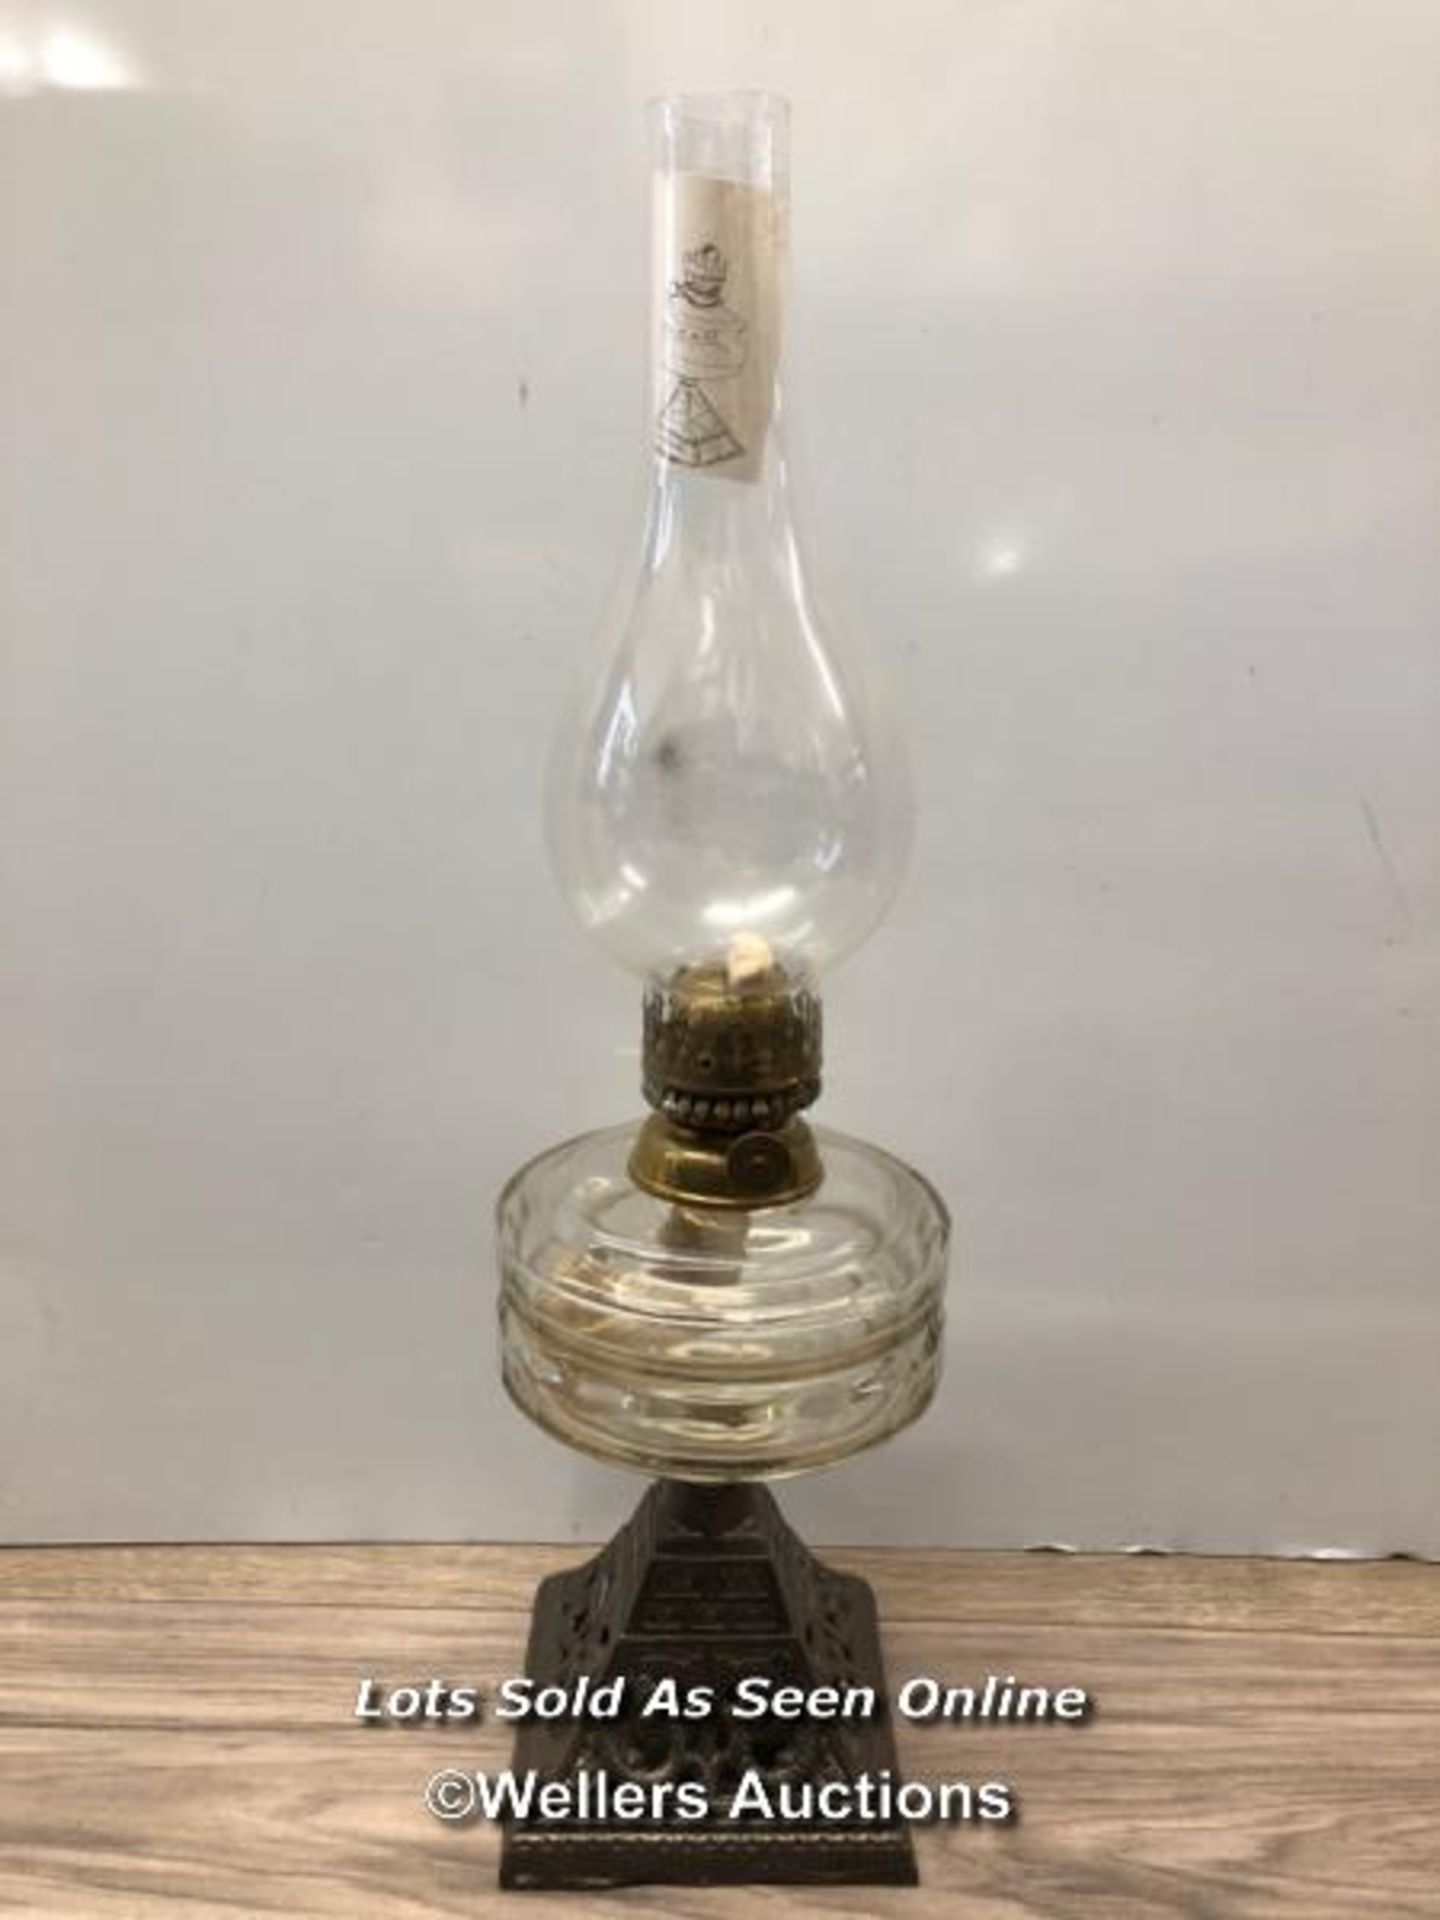 *OIL LAMP WITH GLASS RESERVOIR, CAST IRON BASE, YOUNGS BRILLIANT